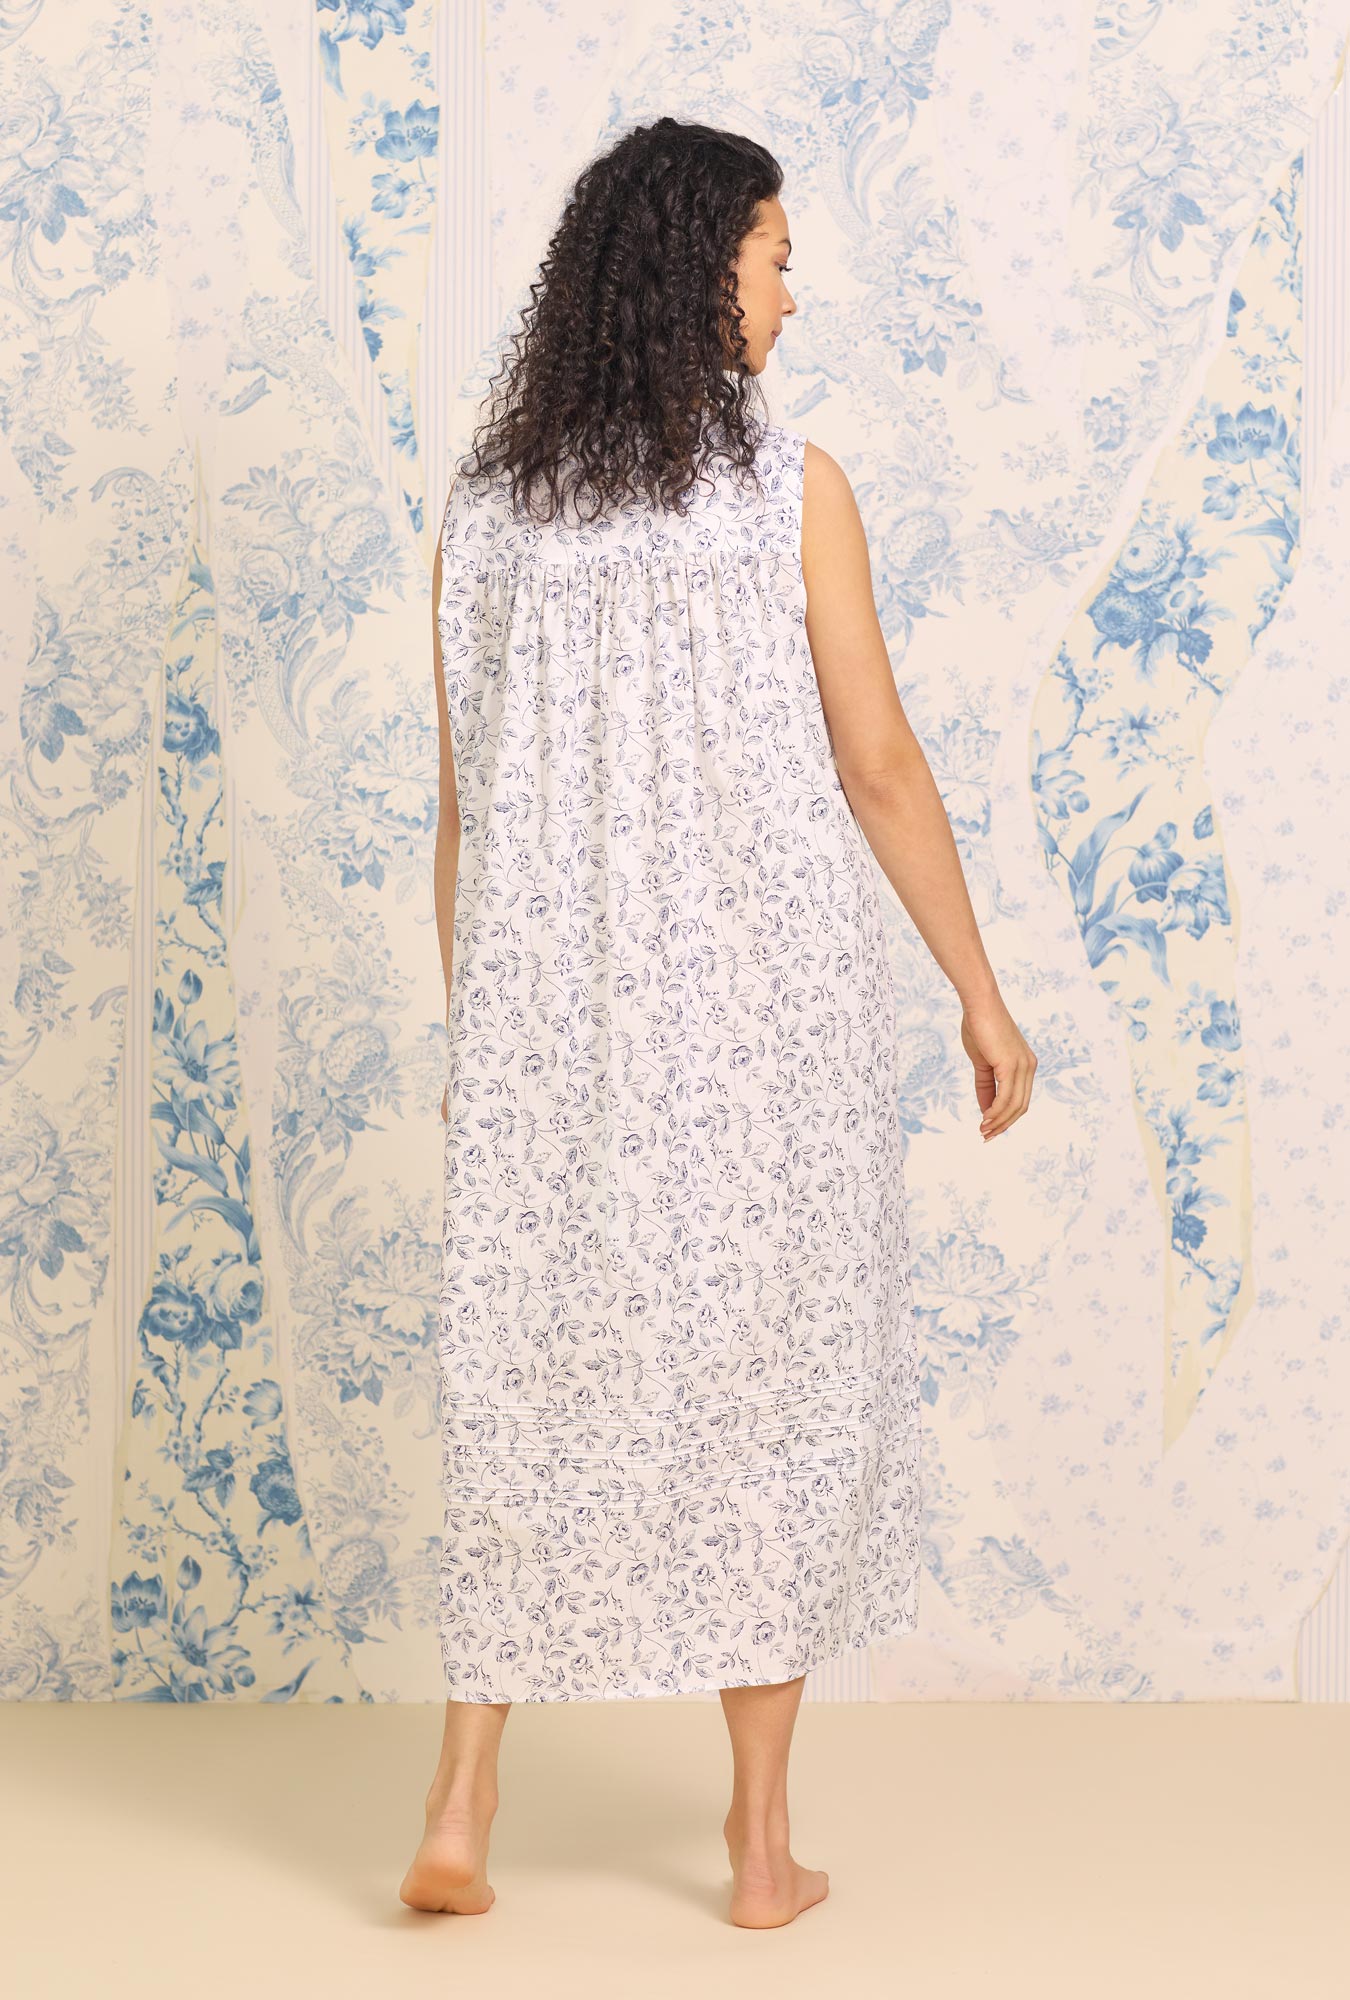 A lady wearing white sleeveless "Eileen" Cotton Nightgown with Marine Rose Floral print